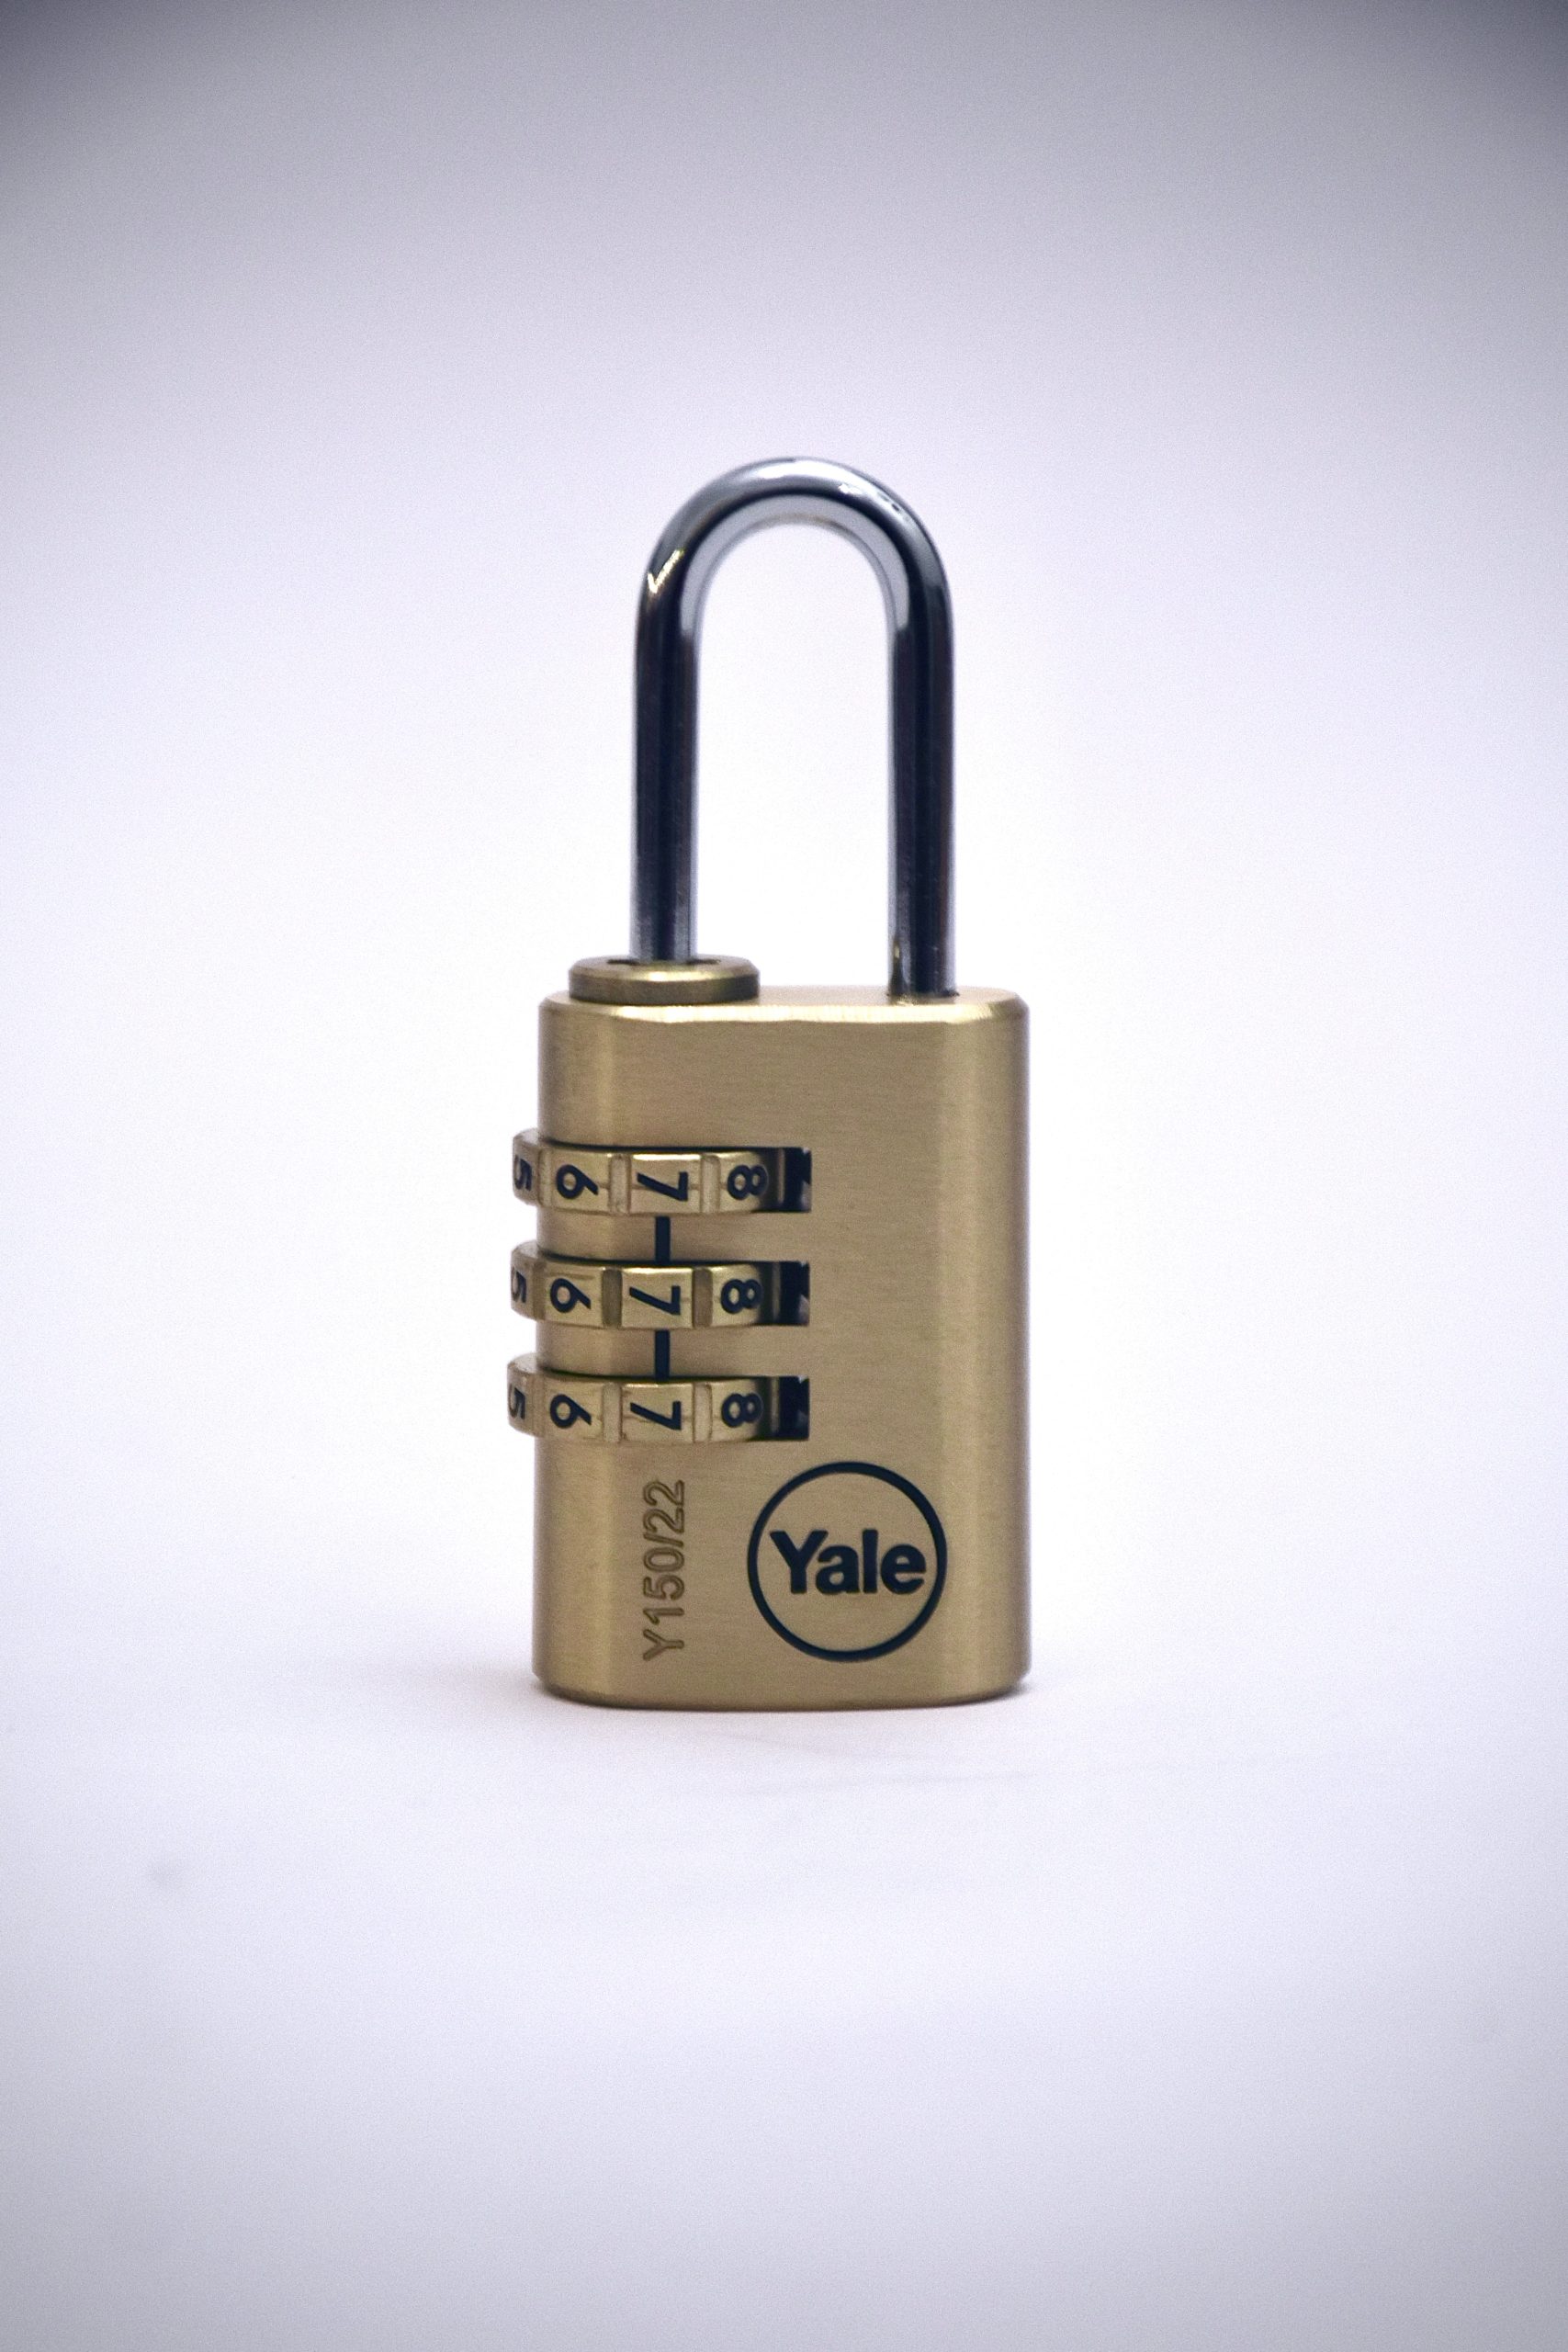 Yale: Security built-in